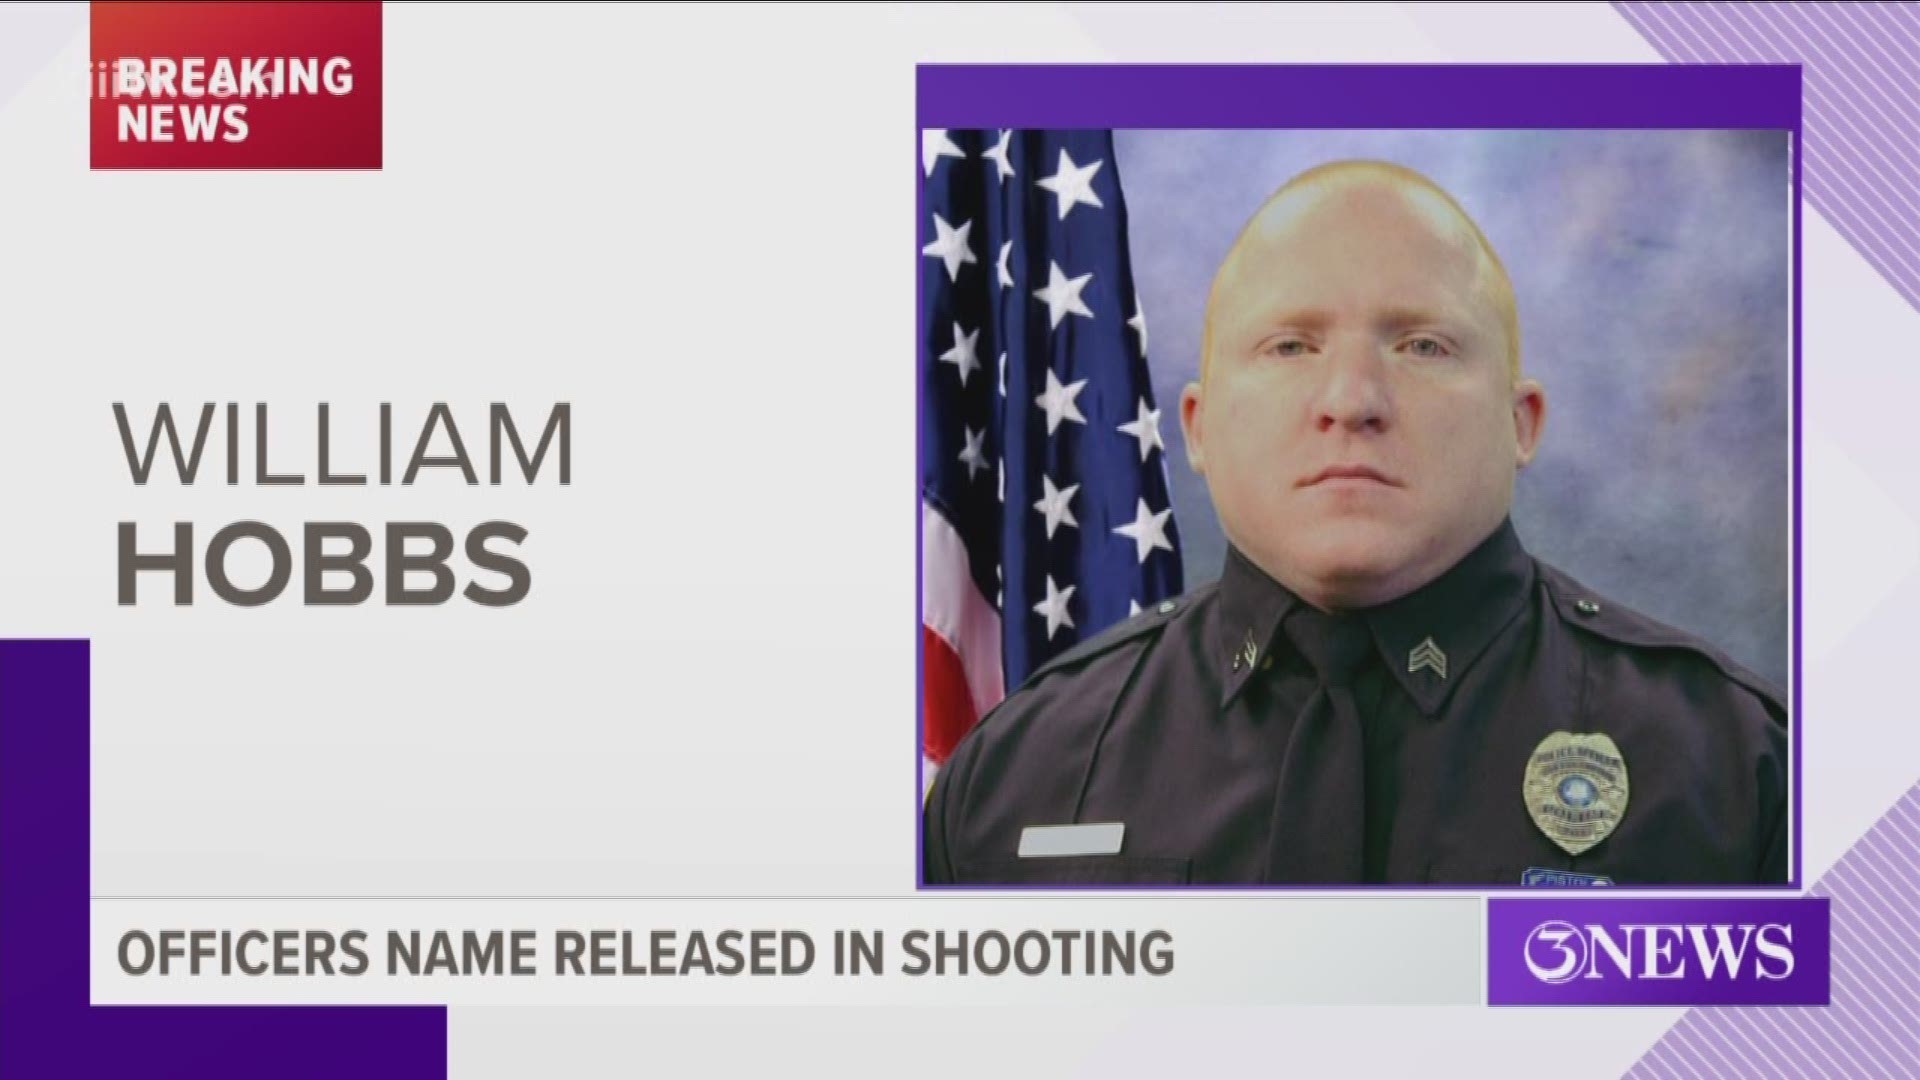 The Corpus Christi Police Department has identified the officer who was involved in a shooting Tuesday morning involving a 22-year-old male armed with a large metal pipe. CCPD Sr. Officer William Hobbs was placed on paid administrative leave pending an investigating into Tuesday's shooting.